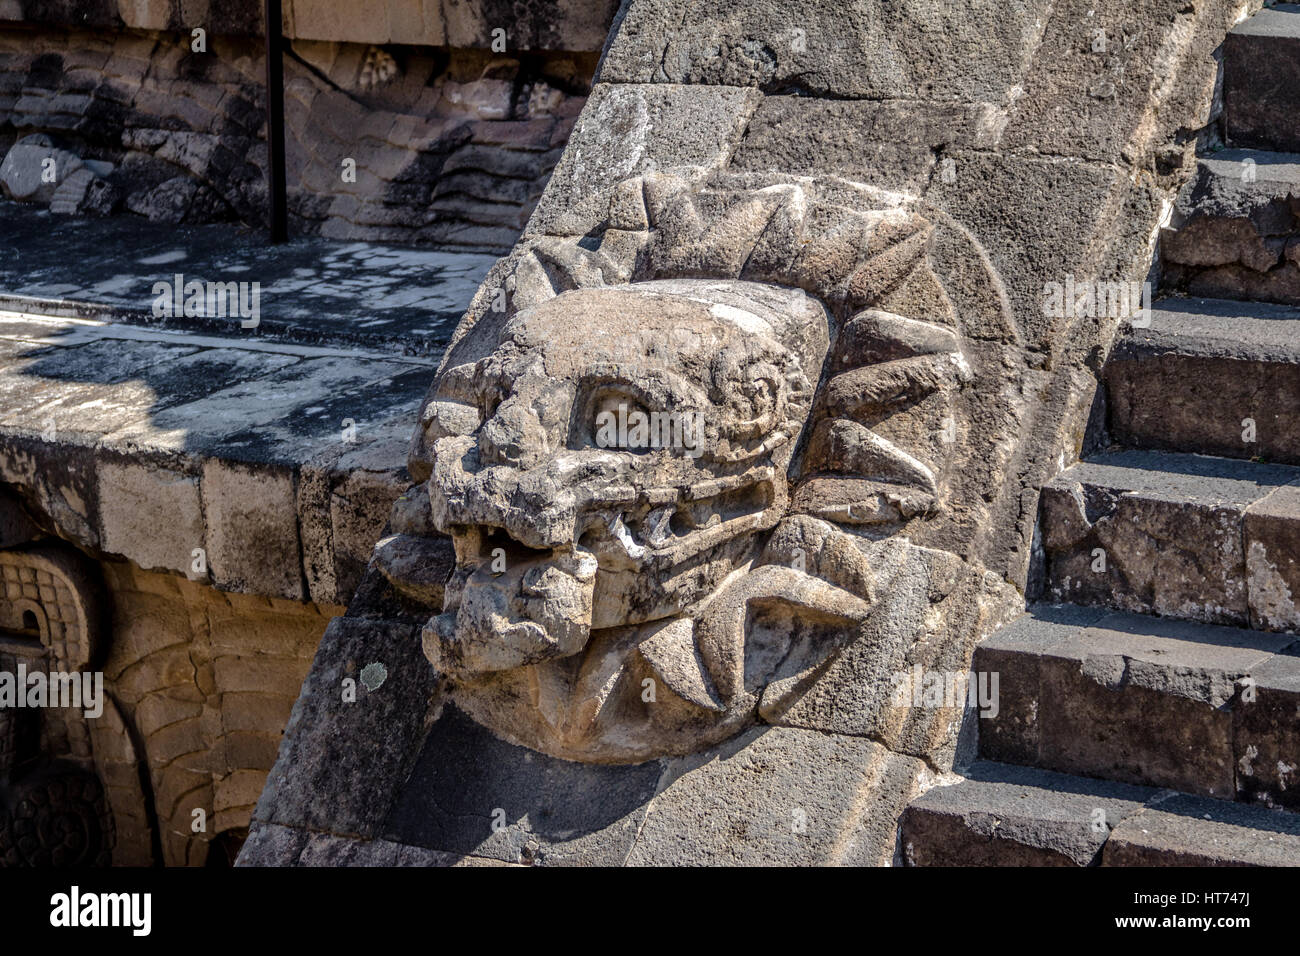 Carving details of Quetzalcoatl Pyramid at Teotihuacan Ruins - Mexico City, Mexico Stock Photo